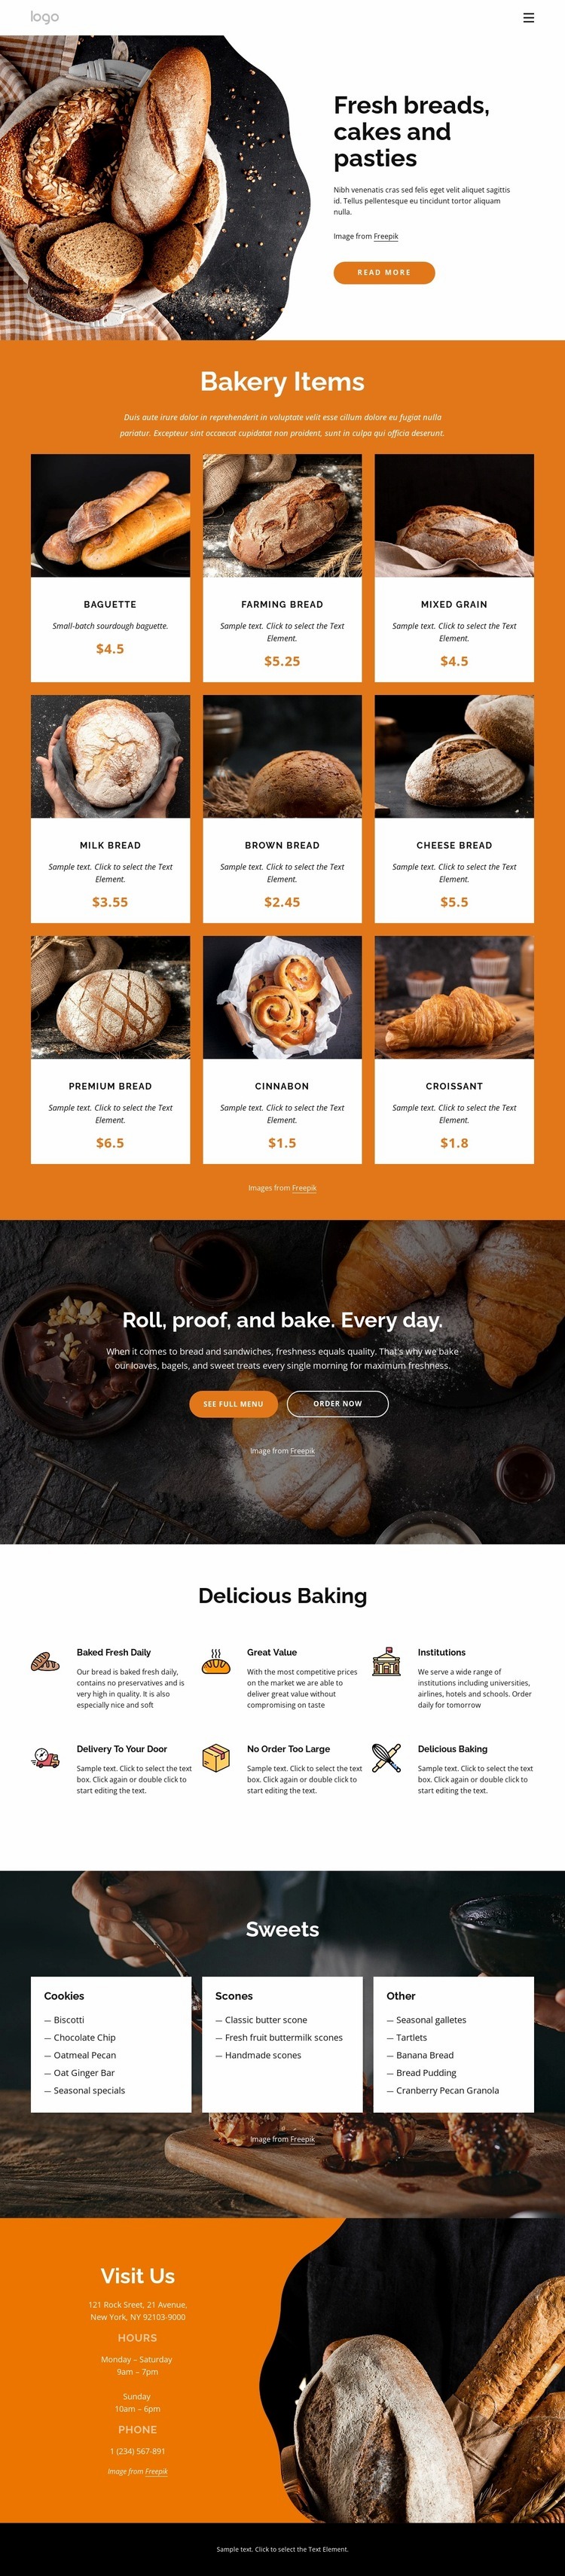 Fresh breads and cakes Wix Template Alternative